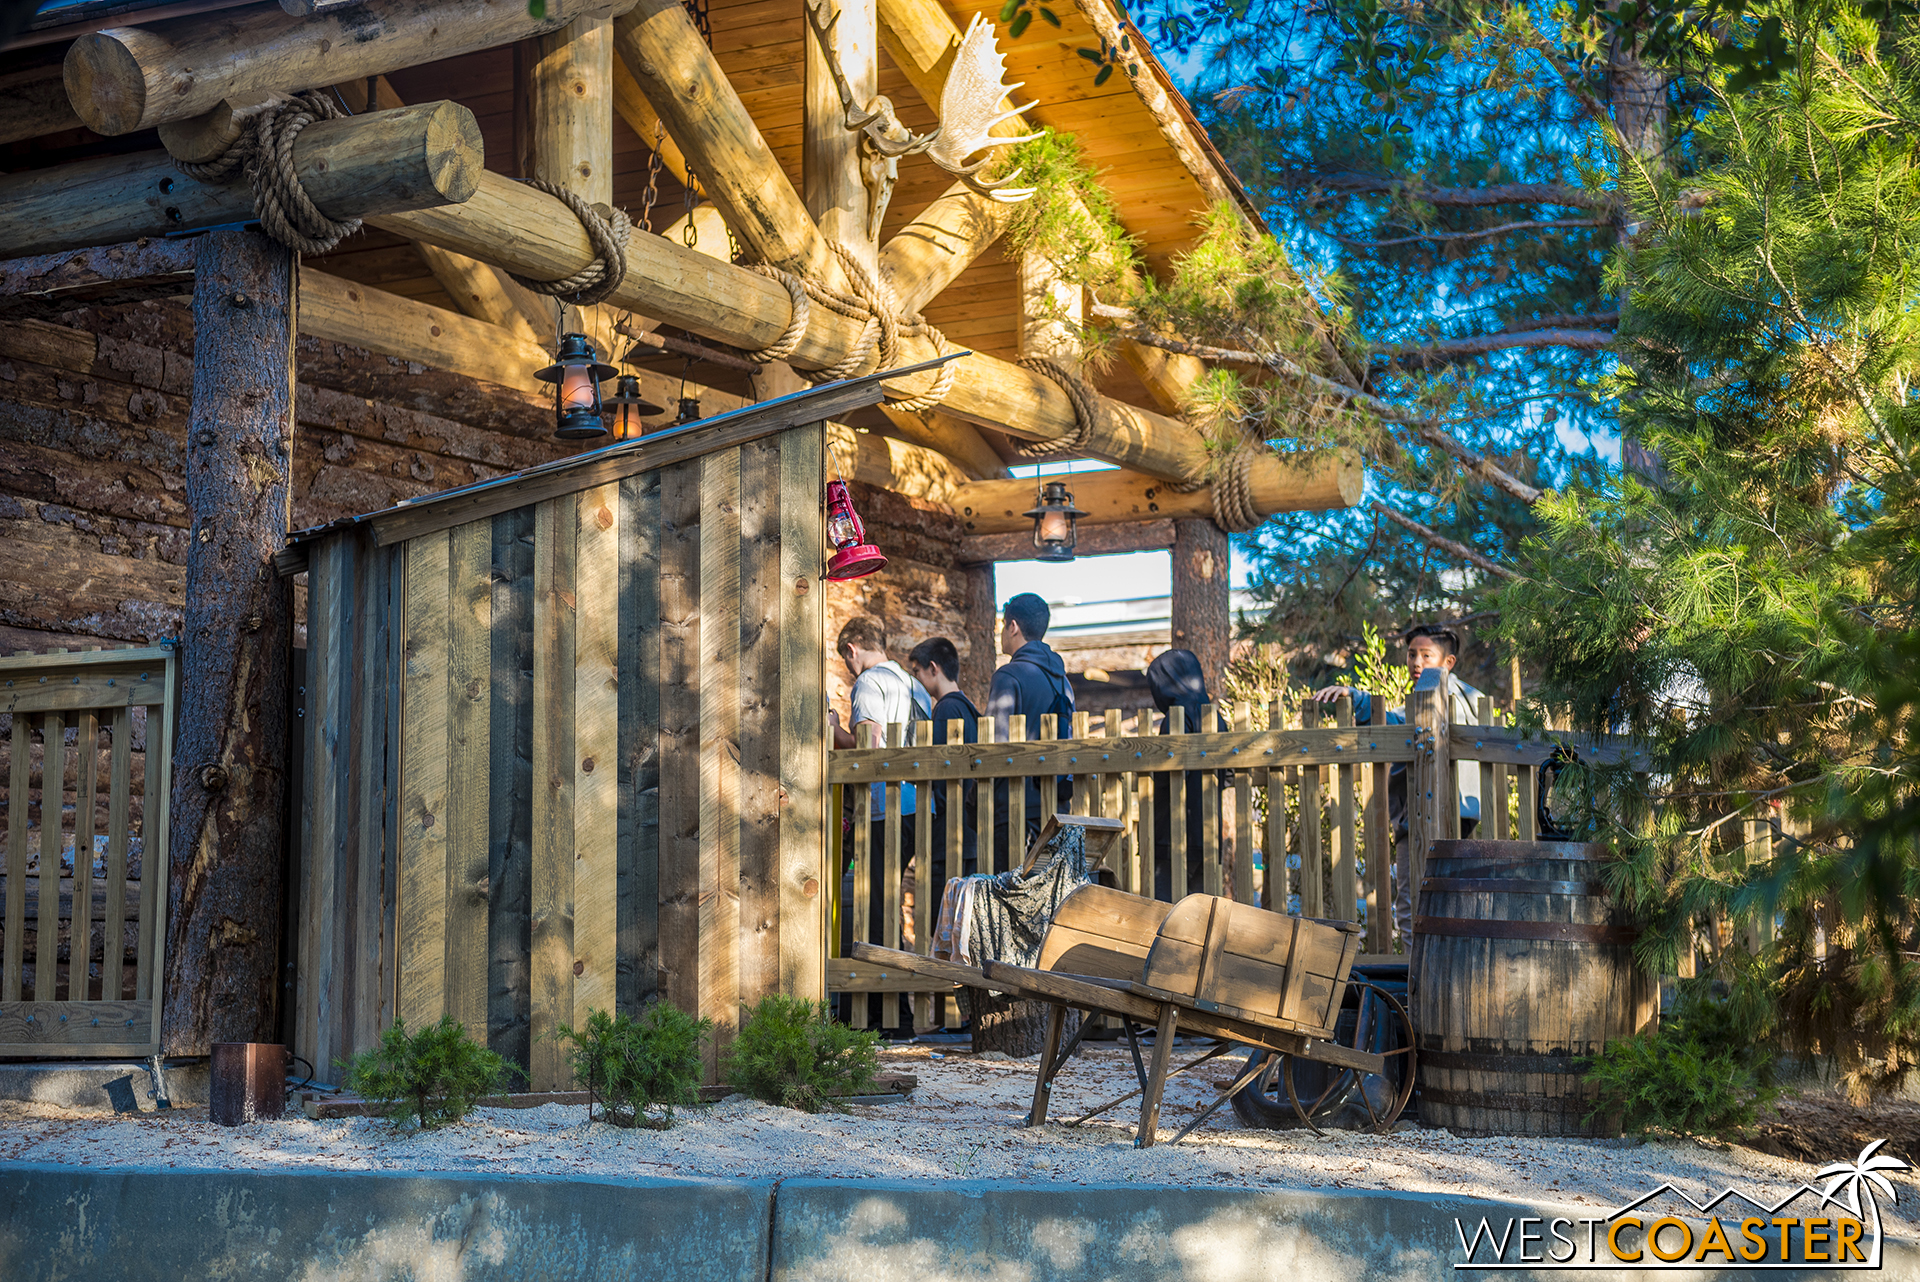  Guests pass by signs of the outpost, like a cart and an outhouse. 